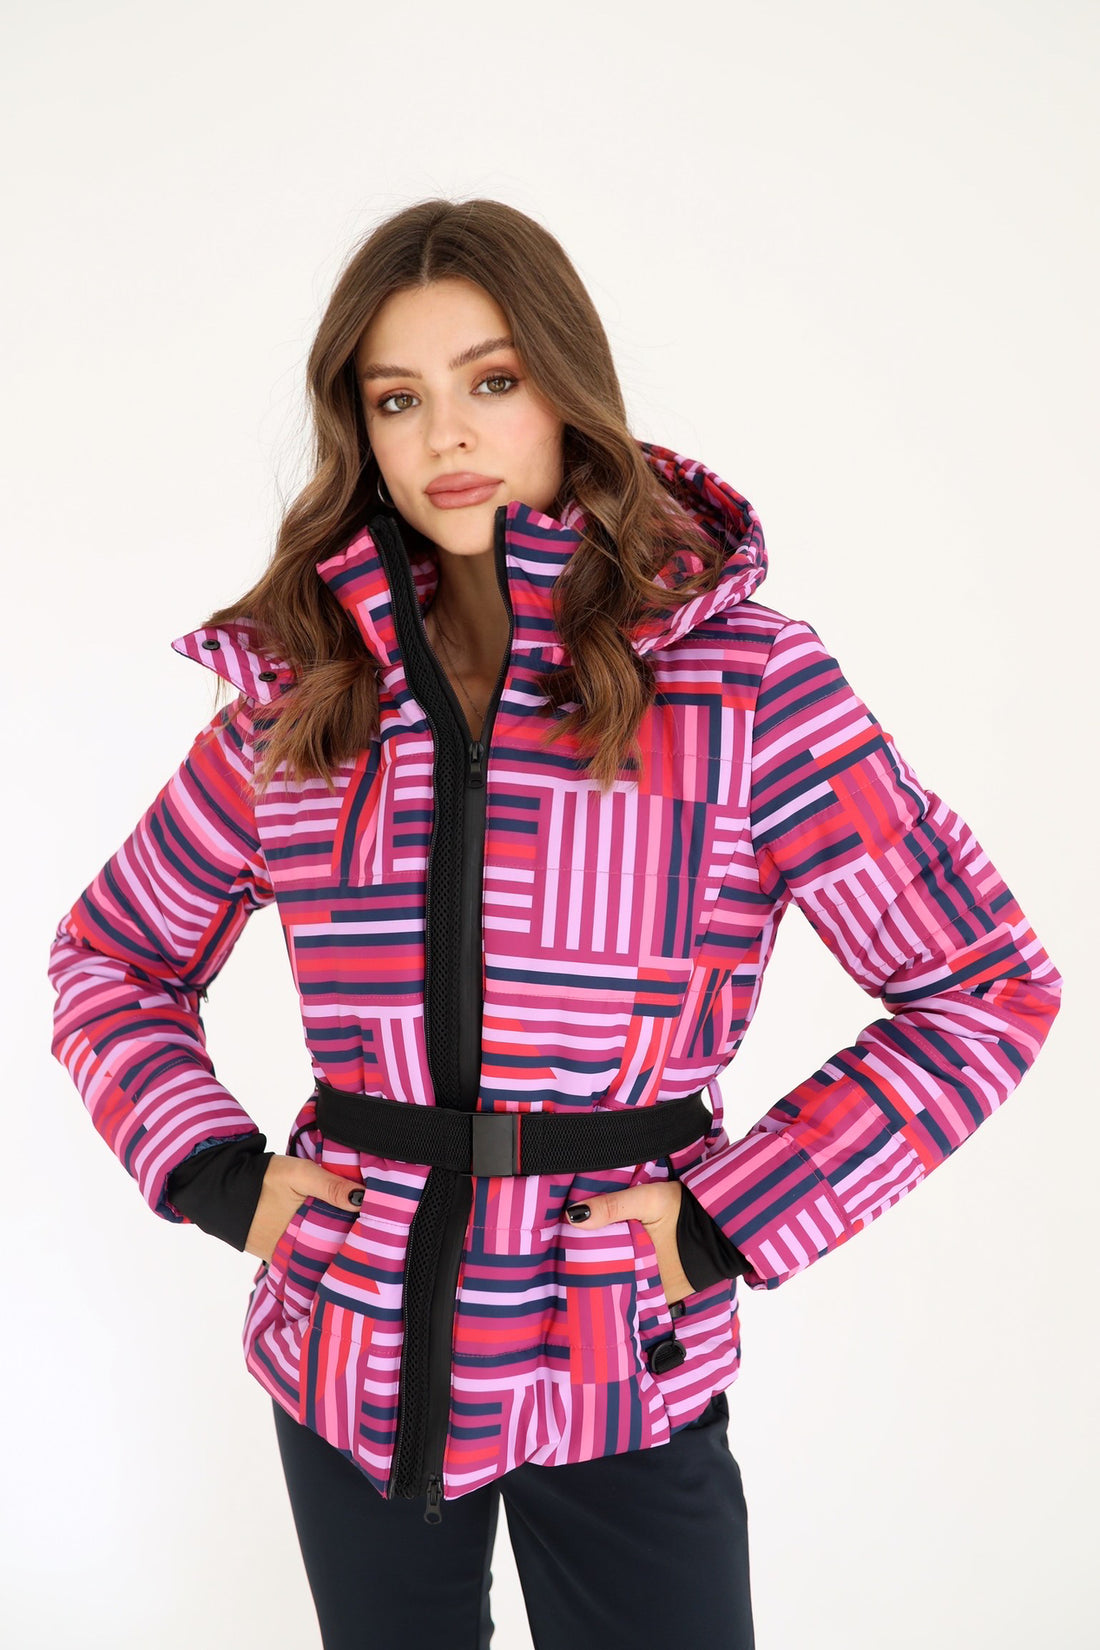 Pink pattern two piece ski outfit - McKinley Pink - Hot pink ski suit